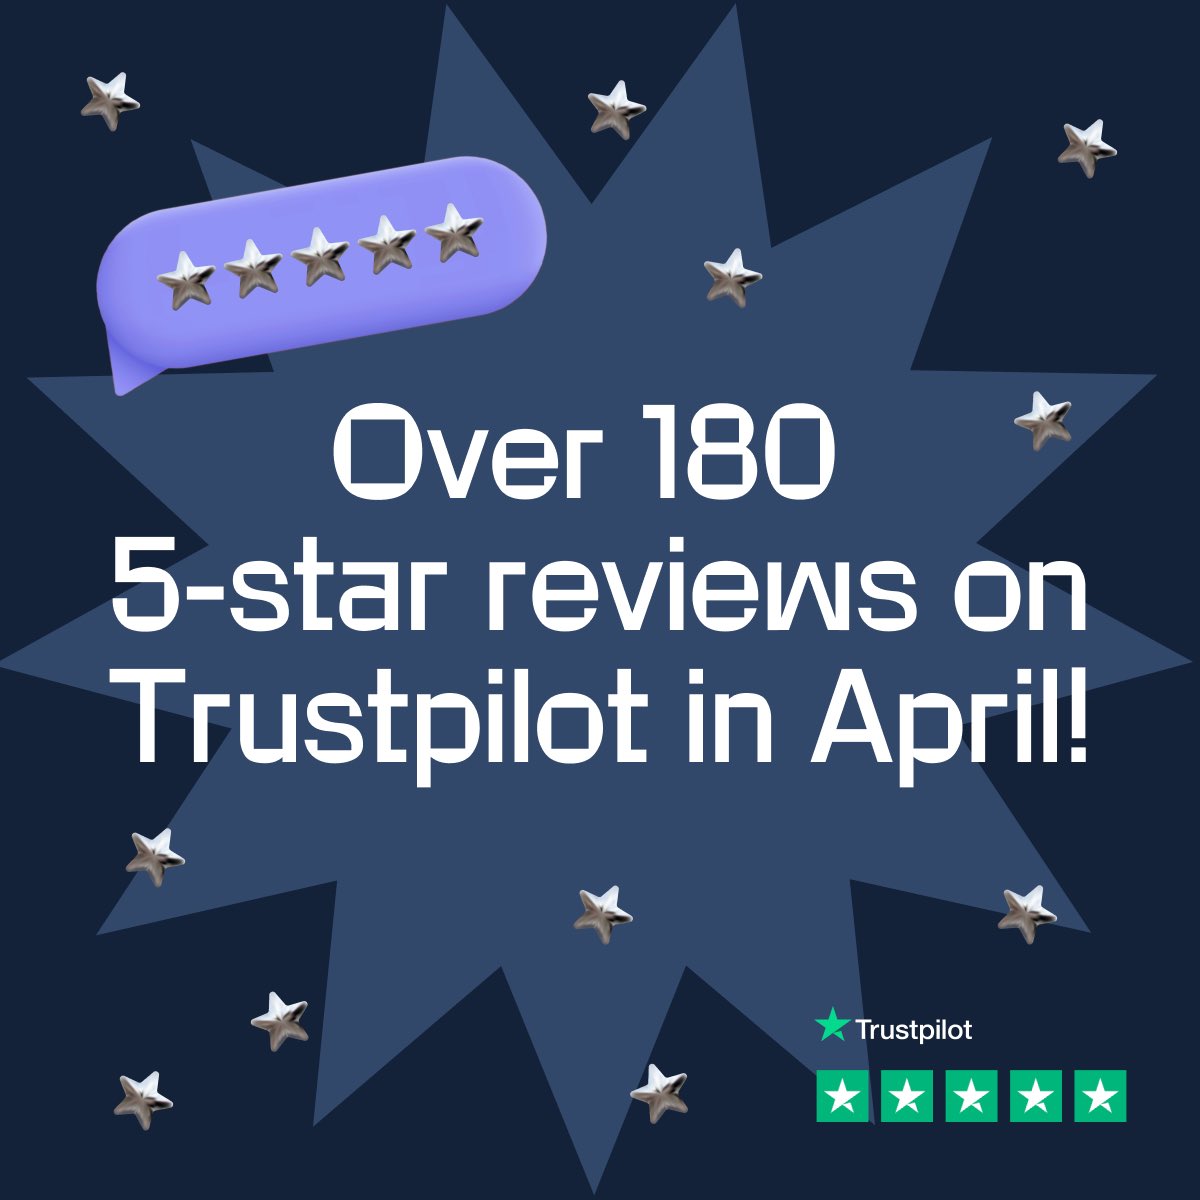 April was amazing for us: a lot of new releases, new records, new plans, and now it’s our most successful month in terms of 5-stars reviews on Trustpilot! 🟣

Thank you guys for such an overwhelmingly positive reaction to our recent launches and for always believing in us! 

We…